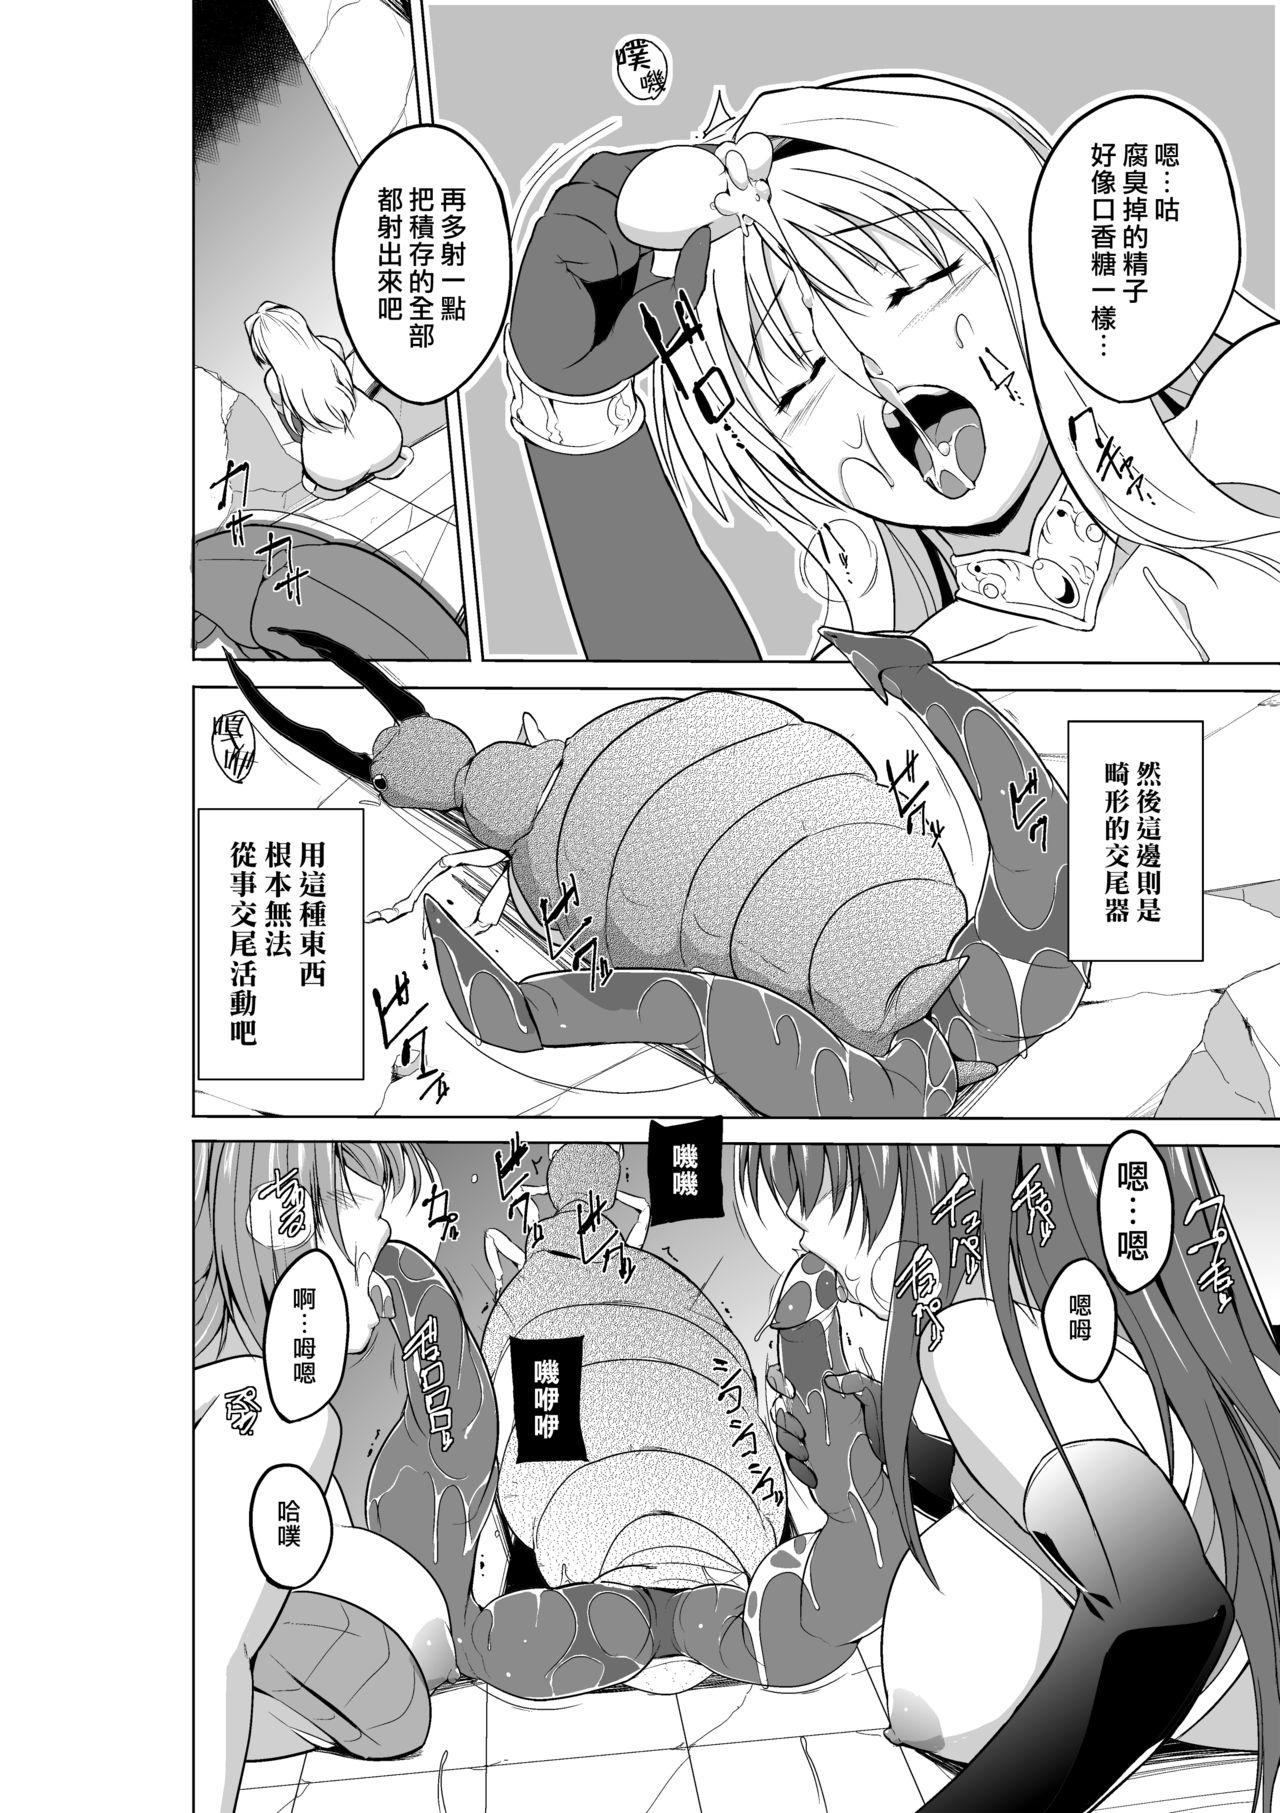 Teamskeet Dungeon Travelers Minna no Oyuugi - Toheart2 Young Men - Page 6